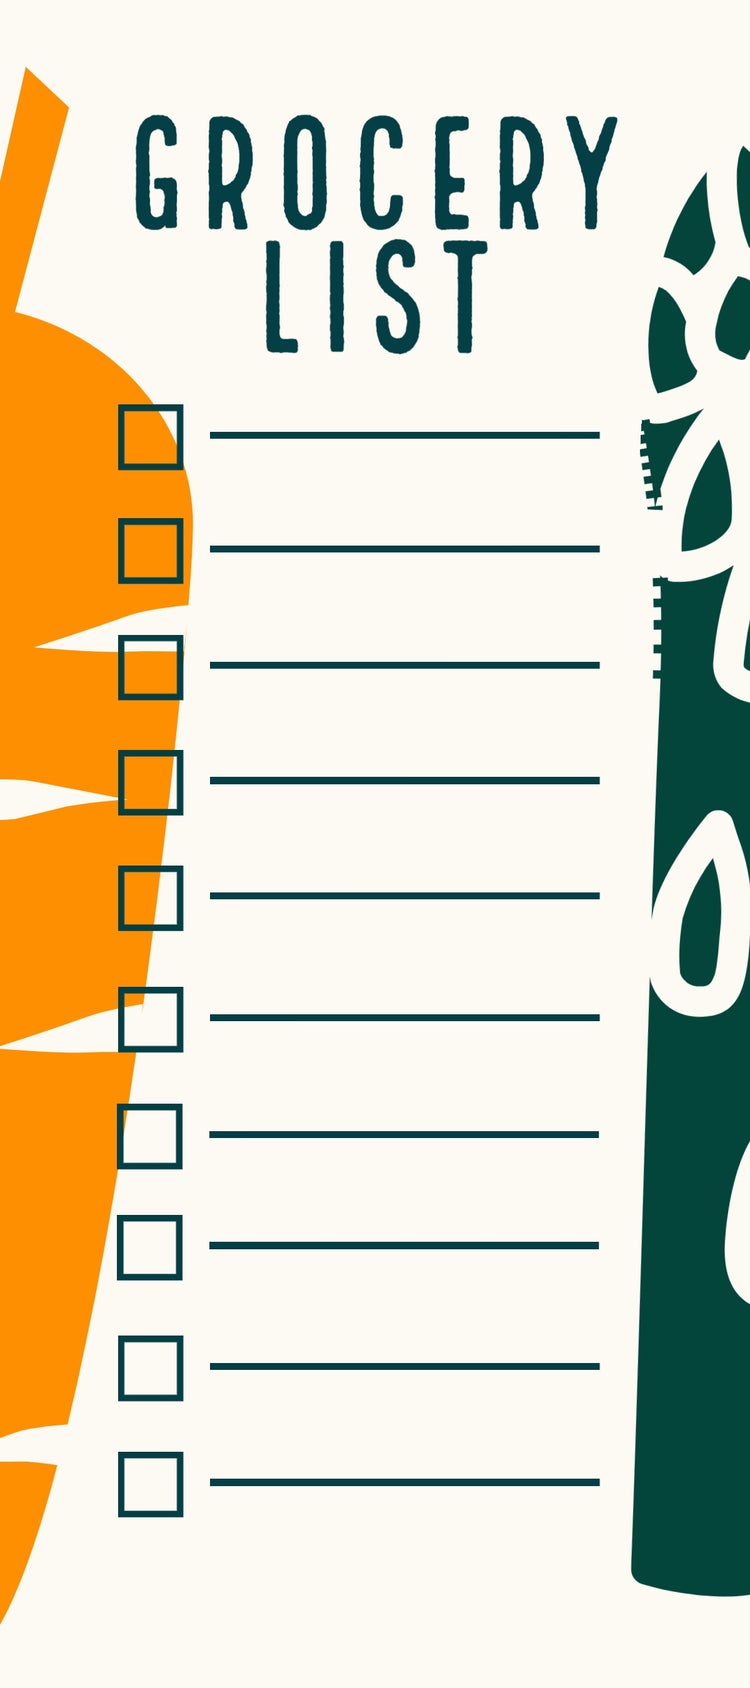 Orange and Green Lined Grocery List